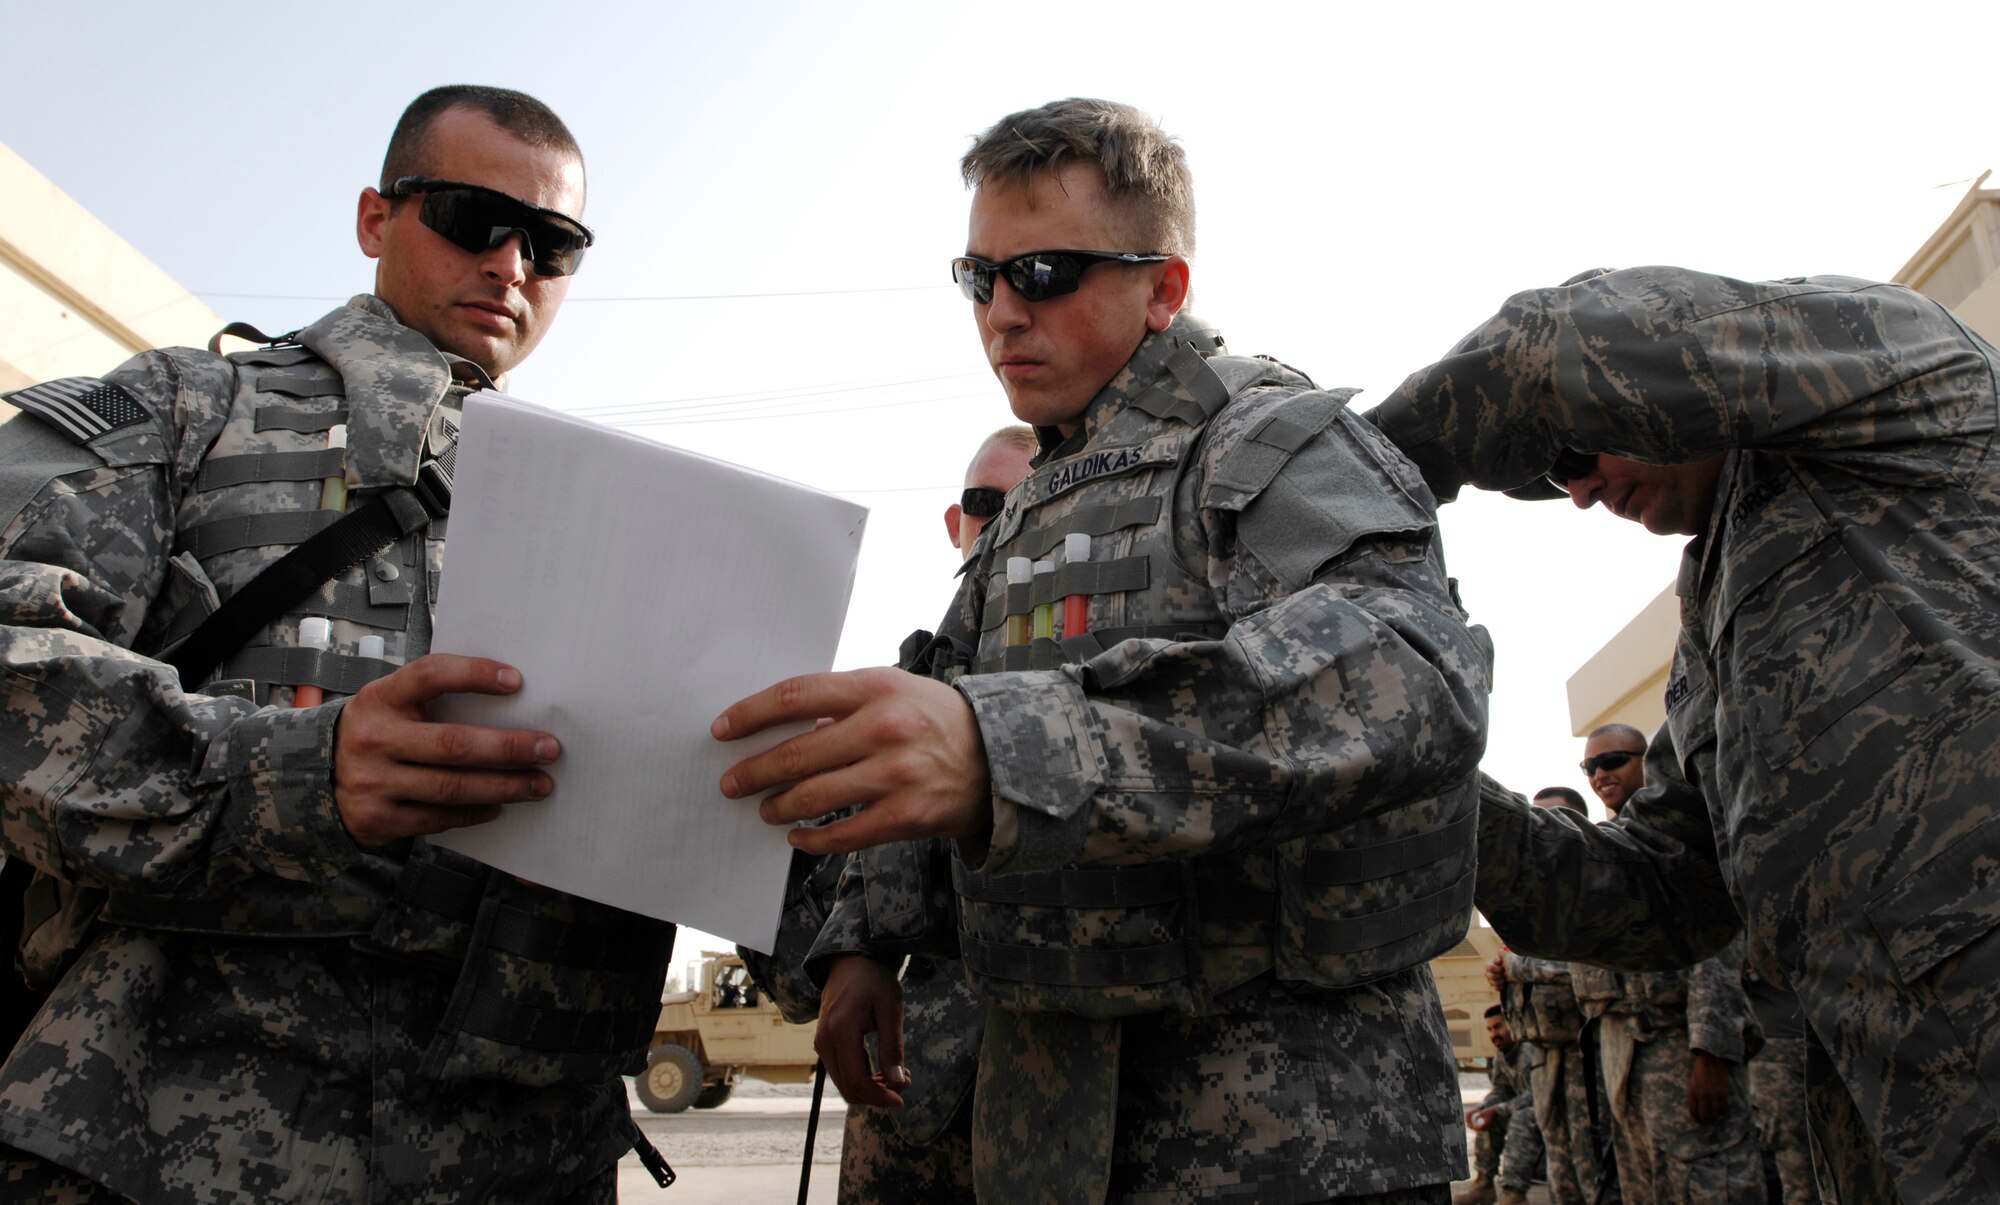 JOINT BASE BALAD, Iraq --Staff Sgt. Joseph Webb (left) and Senior Airman Jeffrey Galdikas (middle) verify information while Senior Master Sgt. Garry Souder (right) adjusts Airman Galdikas' body armor here Sept. 4. Webb, Galdikas and Souder are assigned to the 732nd Expeditionary Civil Engineer Squadron Utilities Detachment 6. The 732nd ECES is just one component of the 732 Air Expeditionary Group, which provides joint source solution Airmen from numerous Air Force specialties to meet Army, Navy and Marine Corps mission requirements. Webb is deployed from Elmendorf Air Force Base, Alaska, and his hometown is North Pole, Alaska. Galdikas is deployed from Hickam Air Force Base Hawaii, and his hometown is Chicago. Souder is deployed from Yokota Air Base, Japan, and his hometown is Las Vegas. (U.S. Air Force photo/Airman 1st Class Jason Epley)